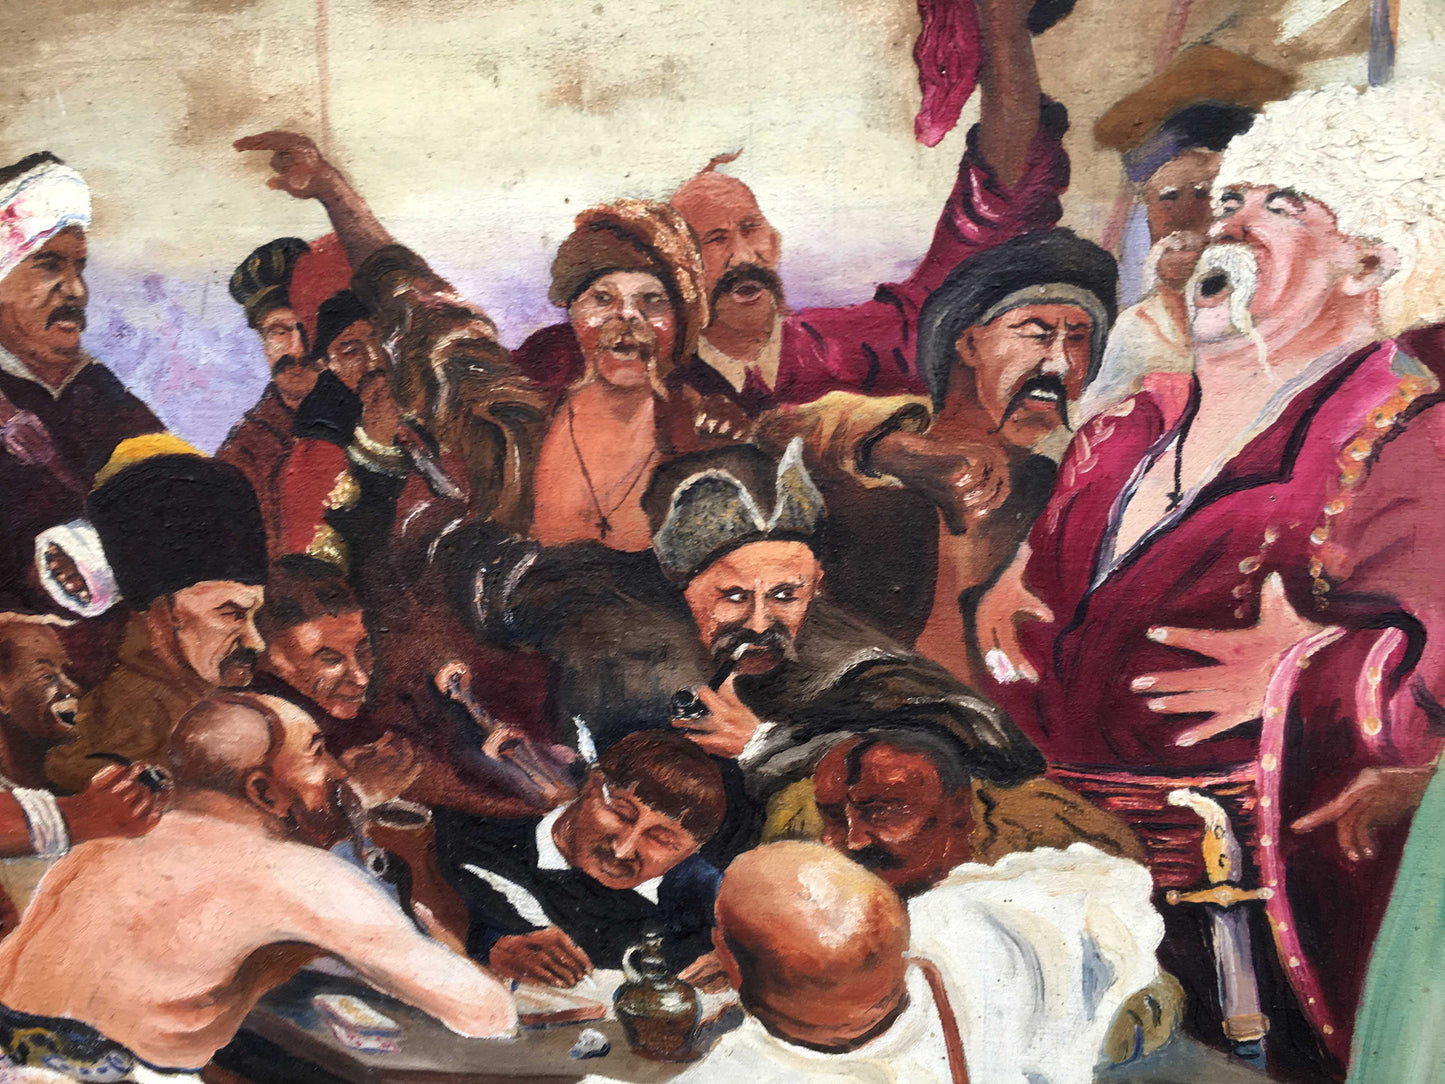 An oil painting capturing the spirit of the Cossacks